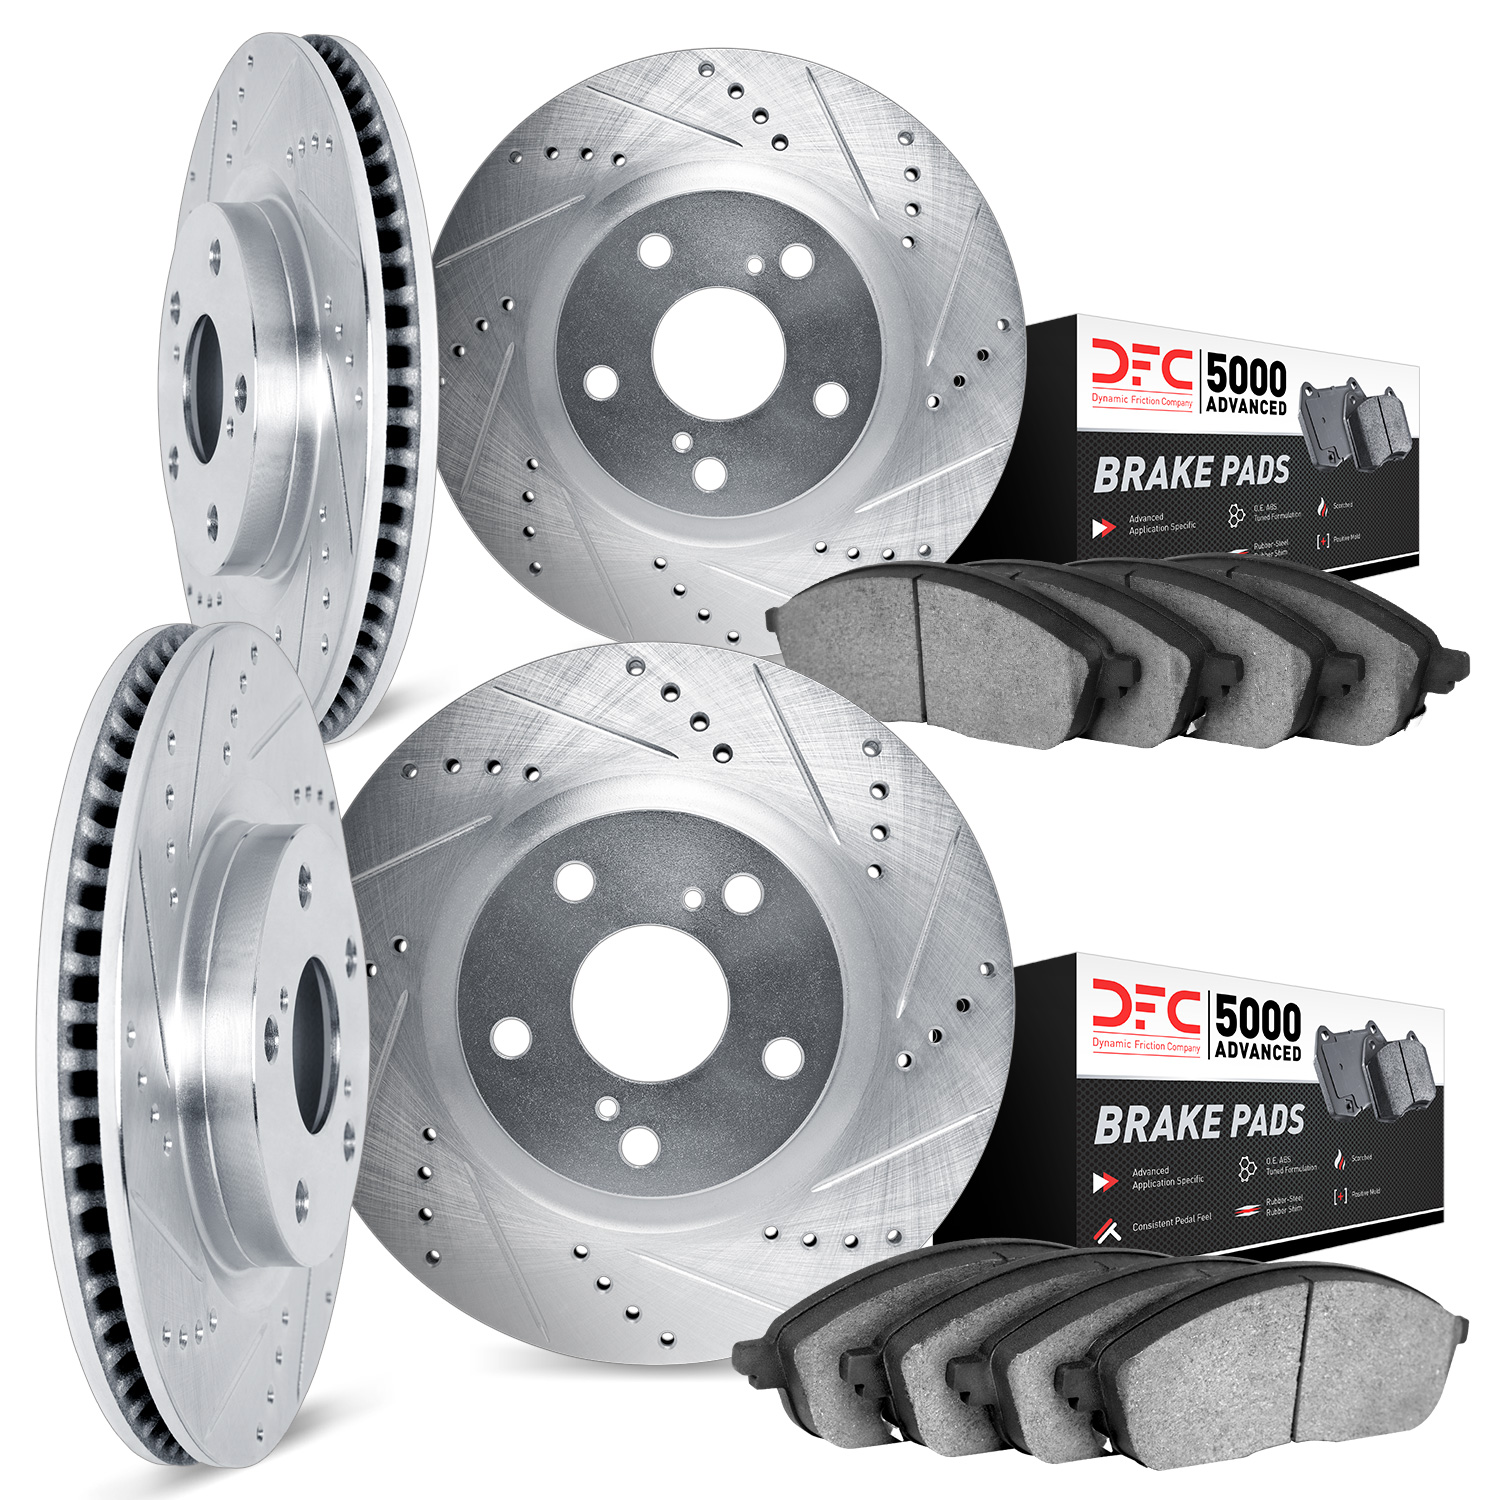 7504-63011 Drilled/Slotted Brake Rotors w/5000 Advanced Brake Pads Kit [Silver], Fits Select Mercedes-Benz, Position: Front and